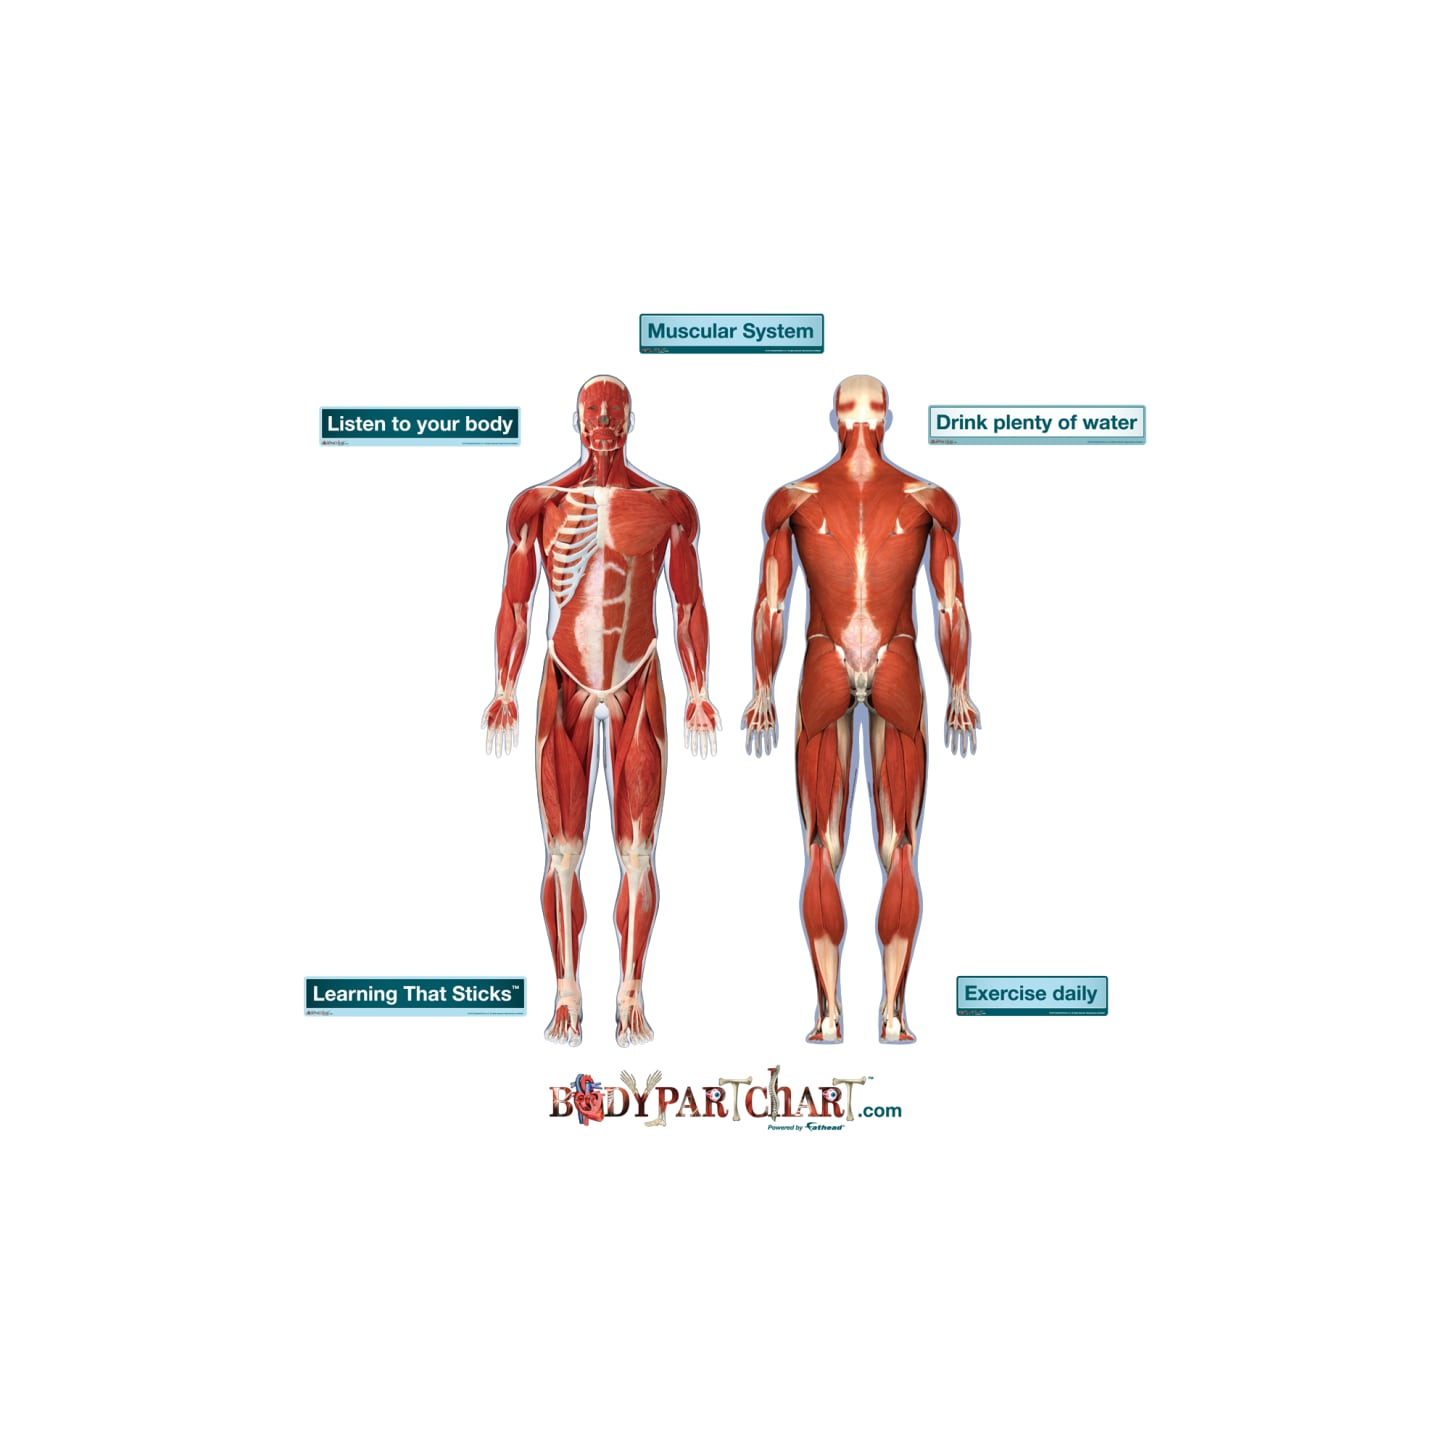 Muscular System Diagram Muscular System Front And Rear View Body Part Chart Removable Wall Graphic